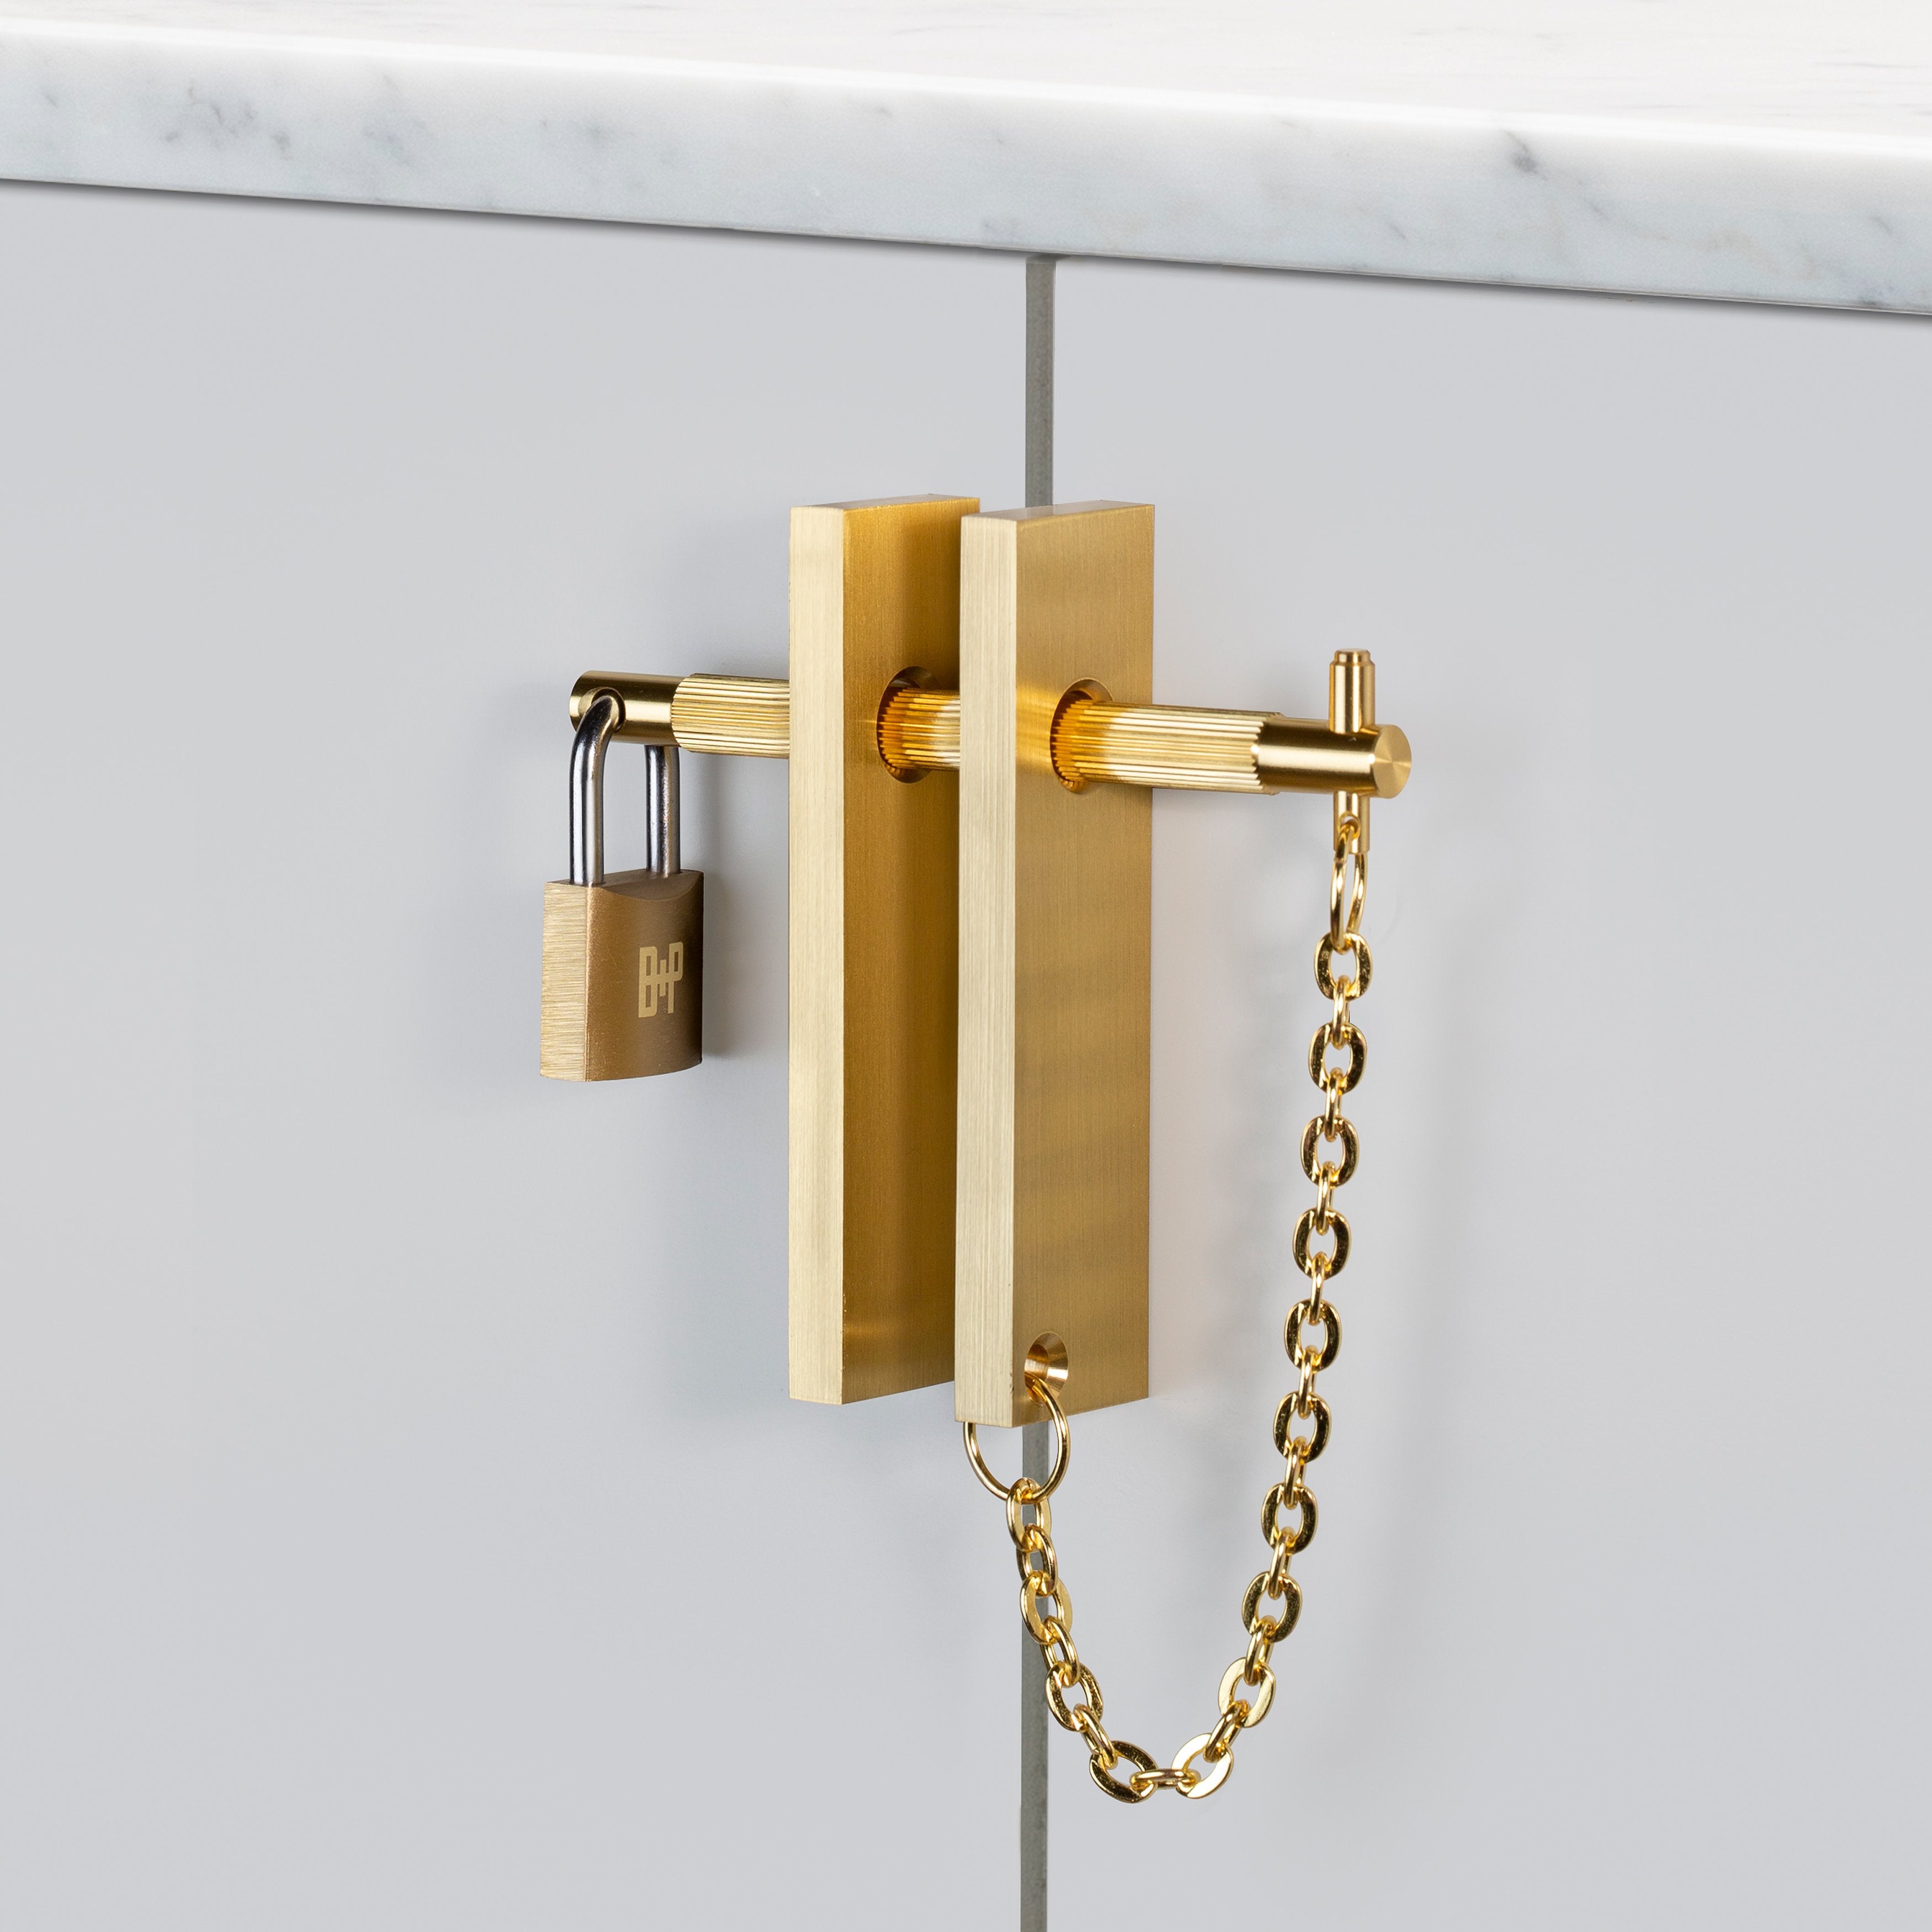 Buster and Punch PRECIOUS BAR / BRASS - No.42 Interiors